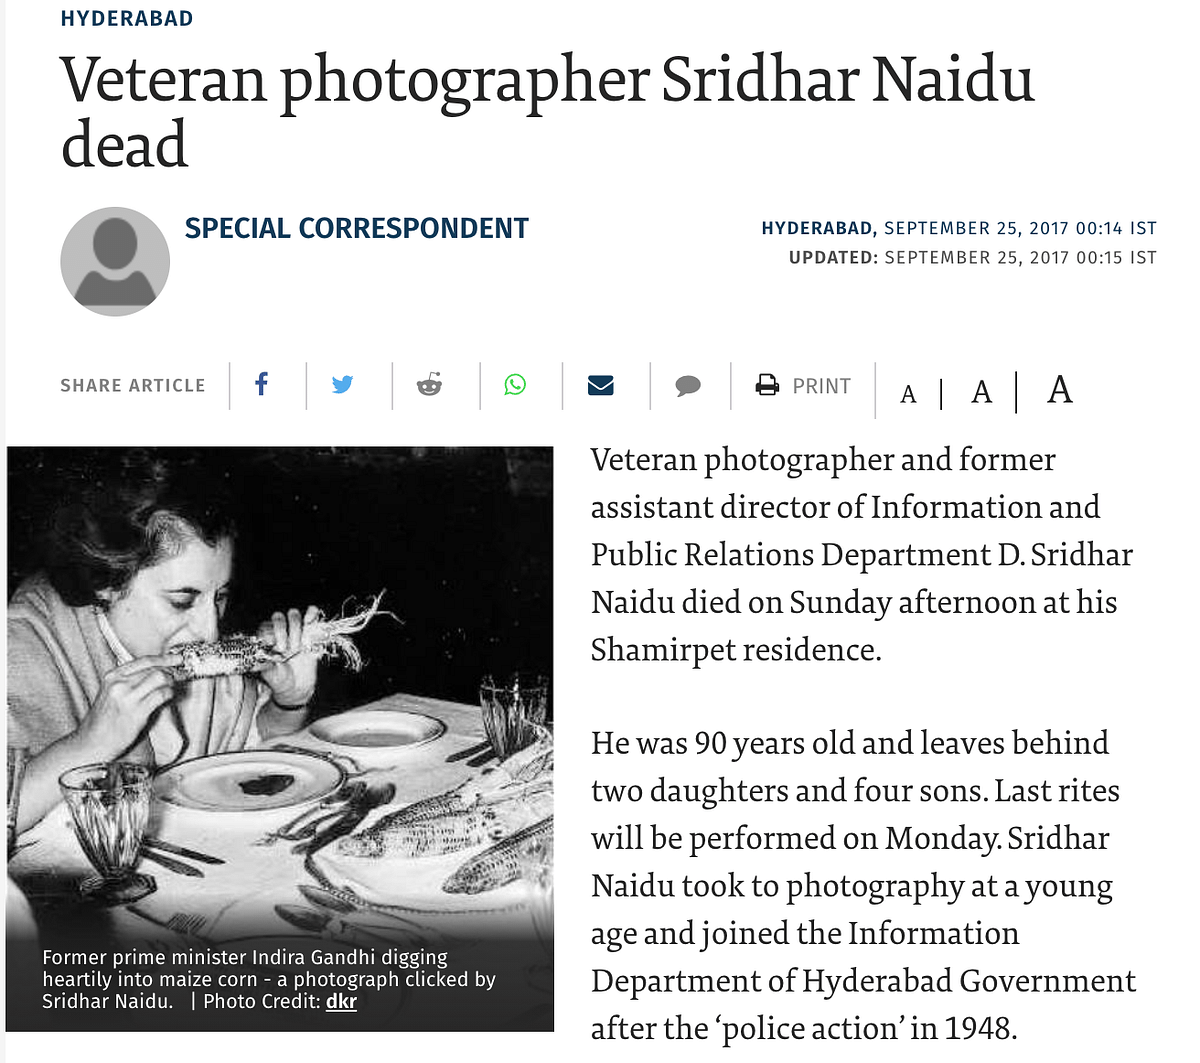 In the original photo, clicked by Sridhar Naidu, Indira Gandhi can be seen eating corn on the cob. 